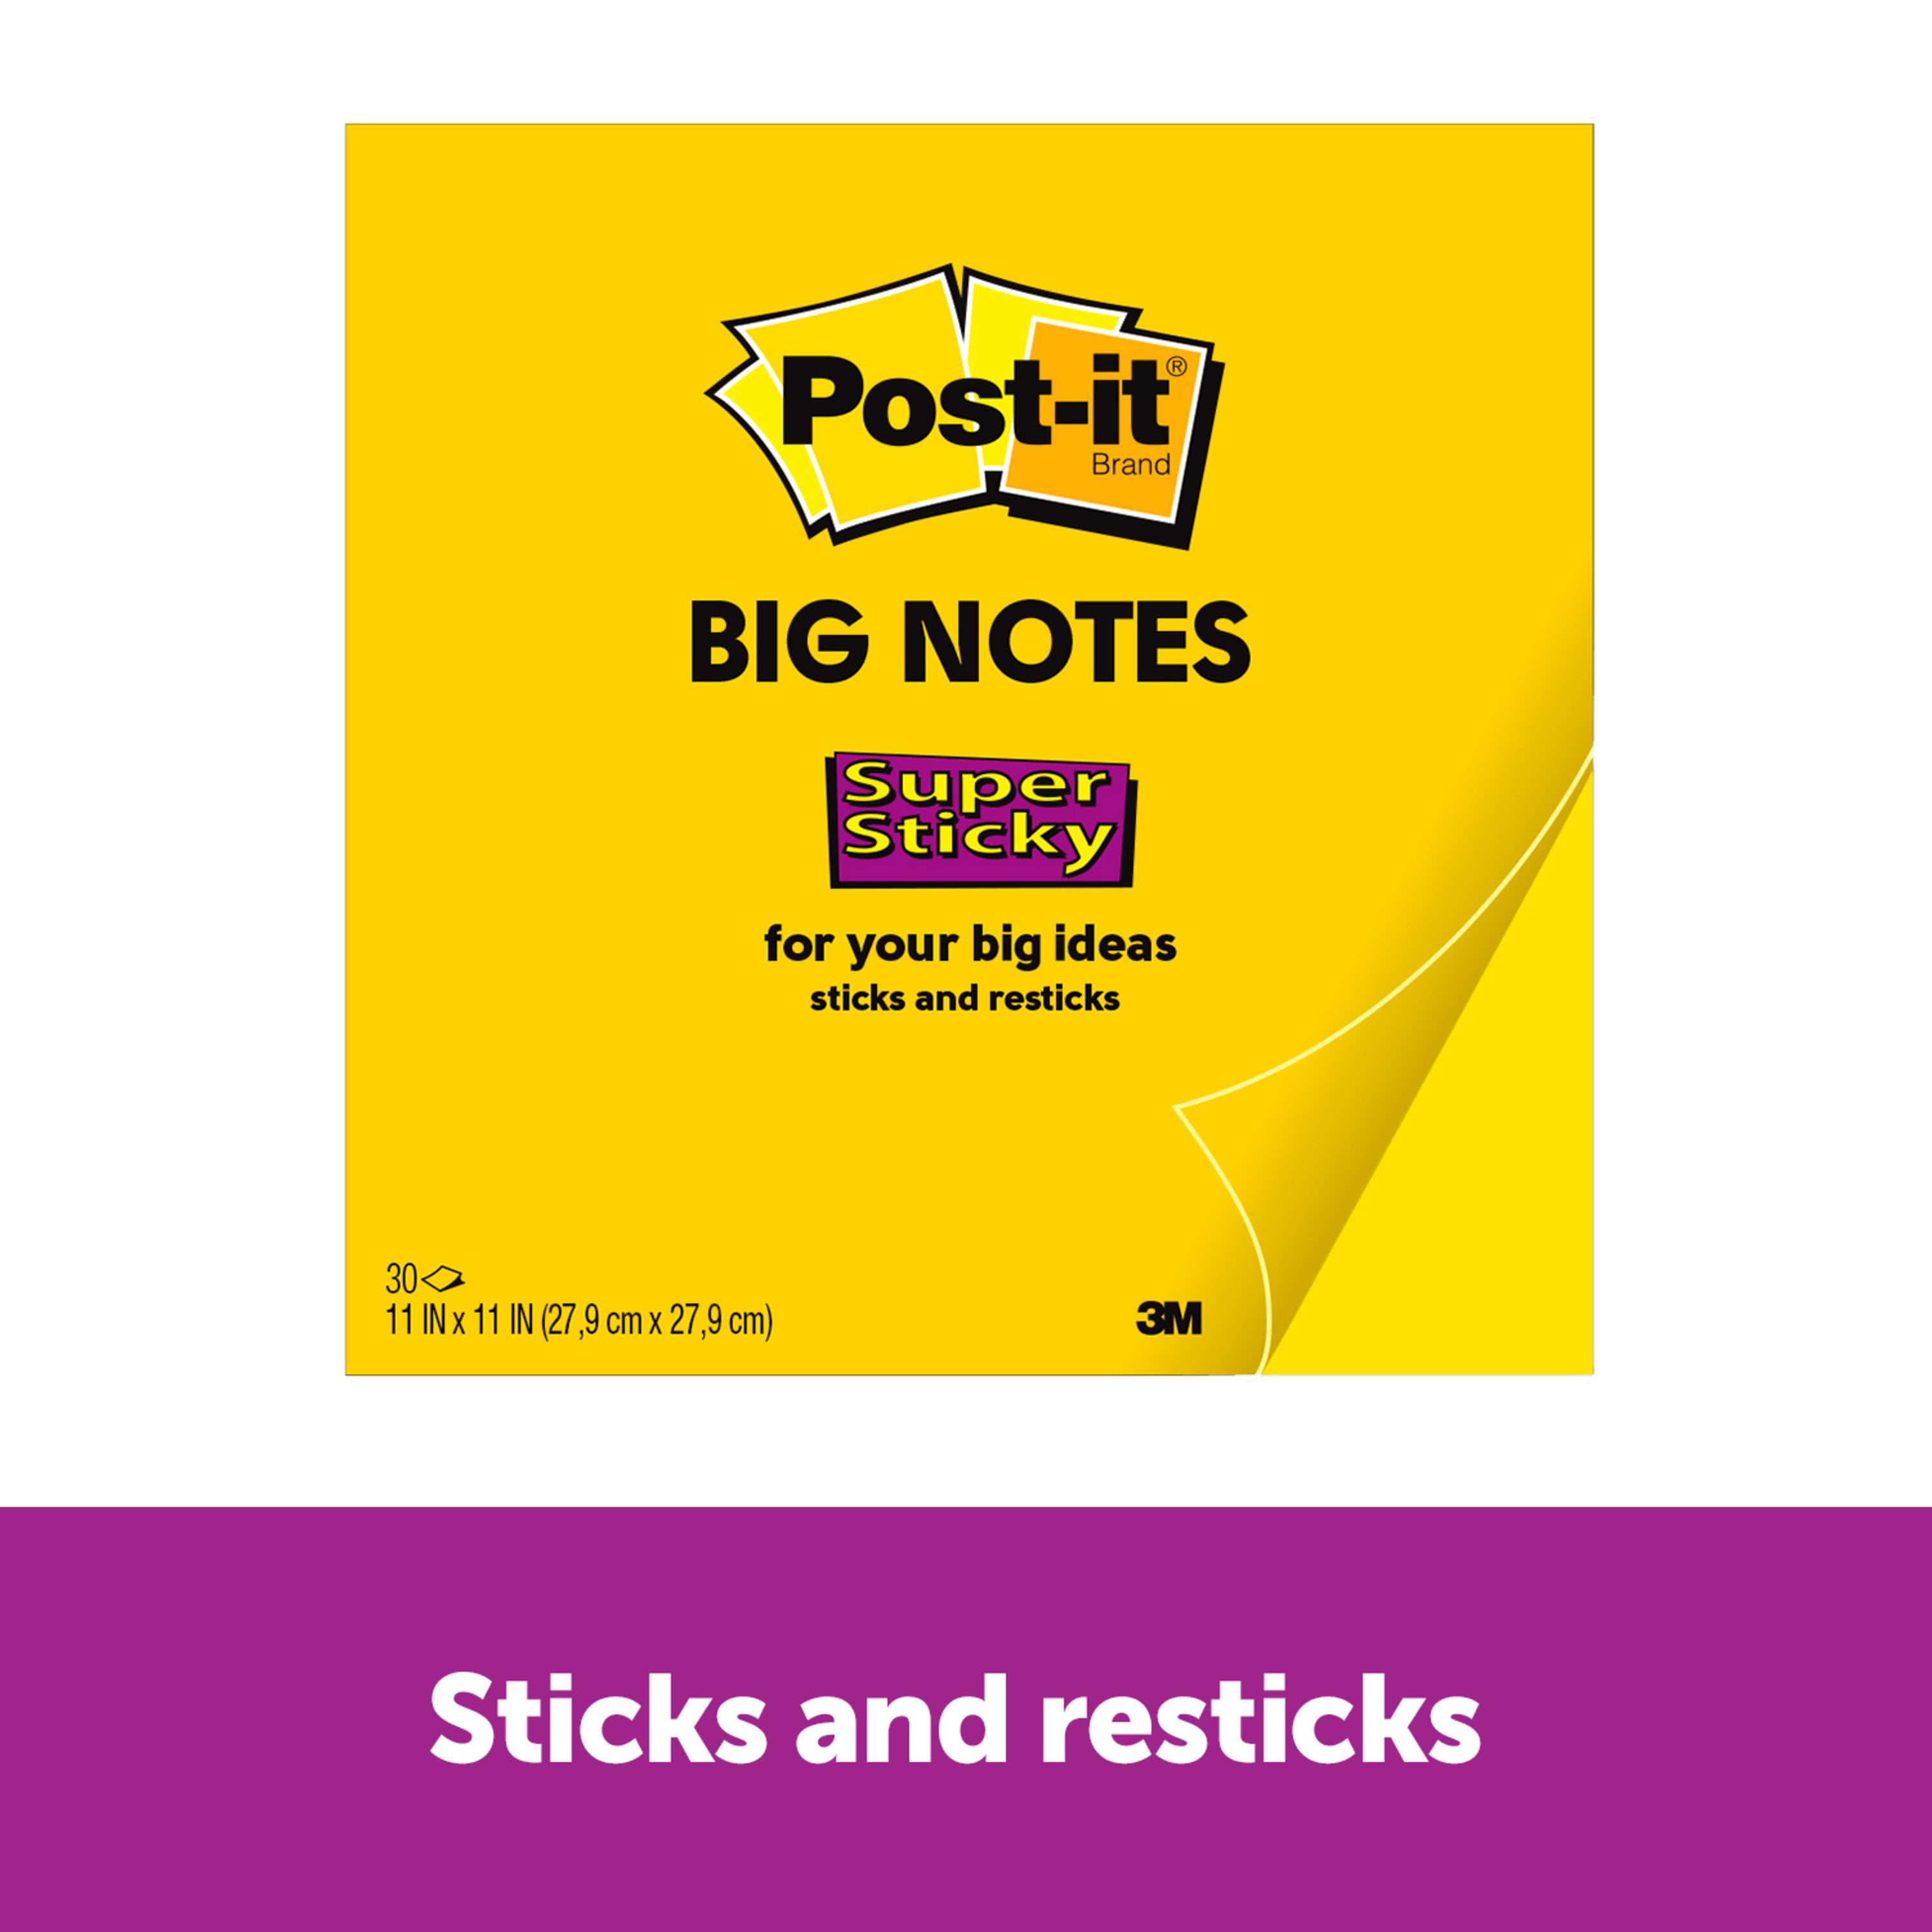 BN15 15 x 15 Inches Sticks and Resticks 1 Pad Super Sticking Power Post-it Super Sticky Big Notes 30 Sheets/Pad Large Neon Orange Paper 